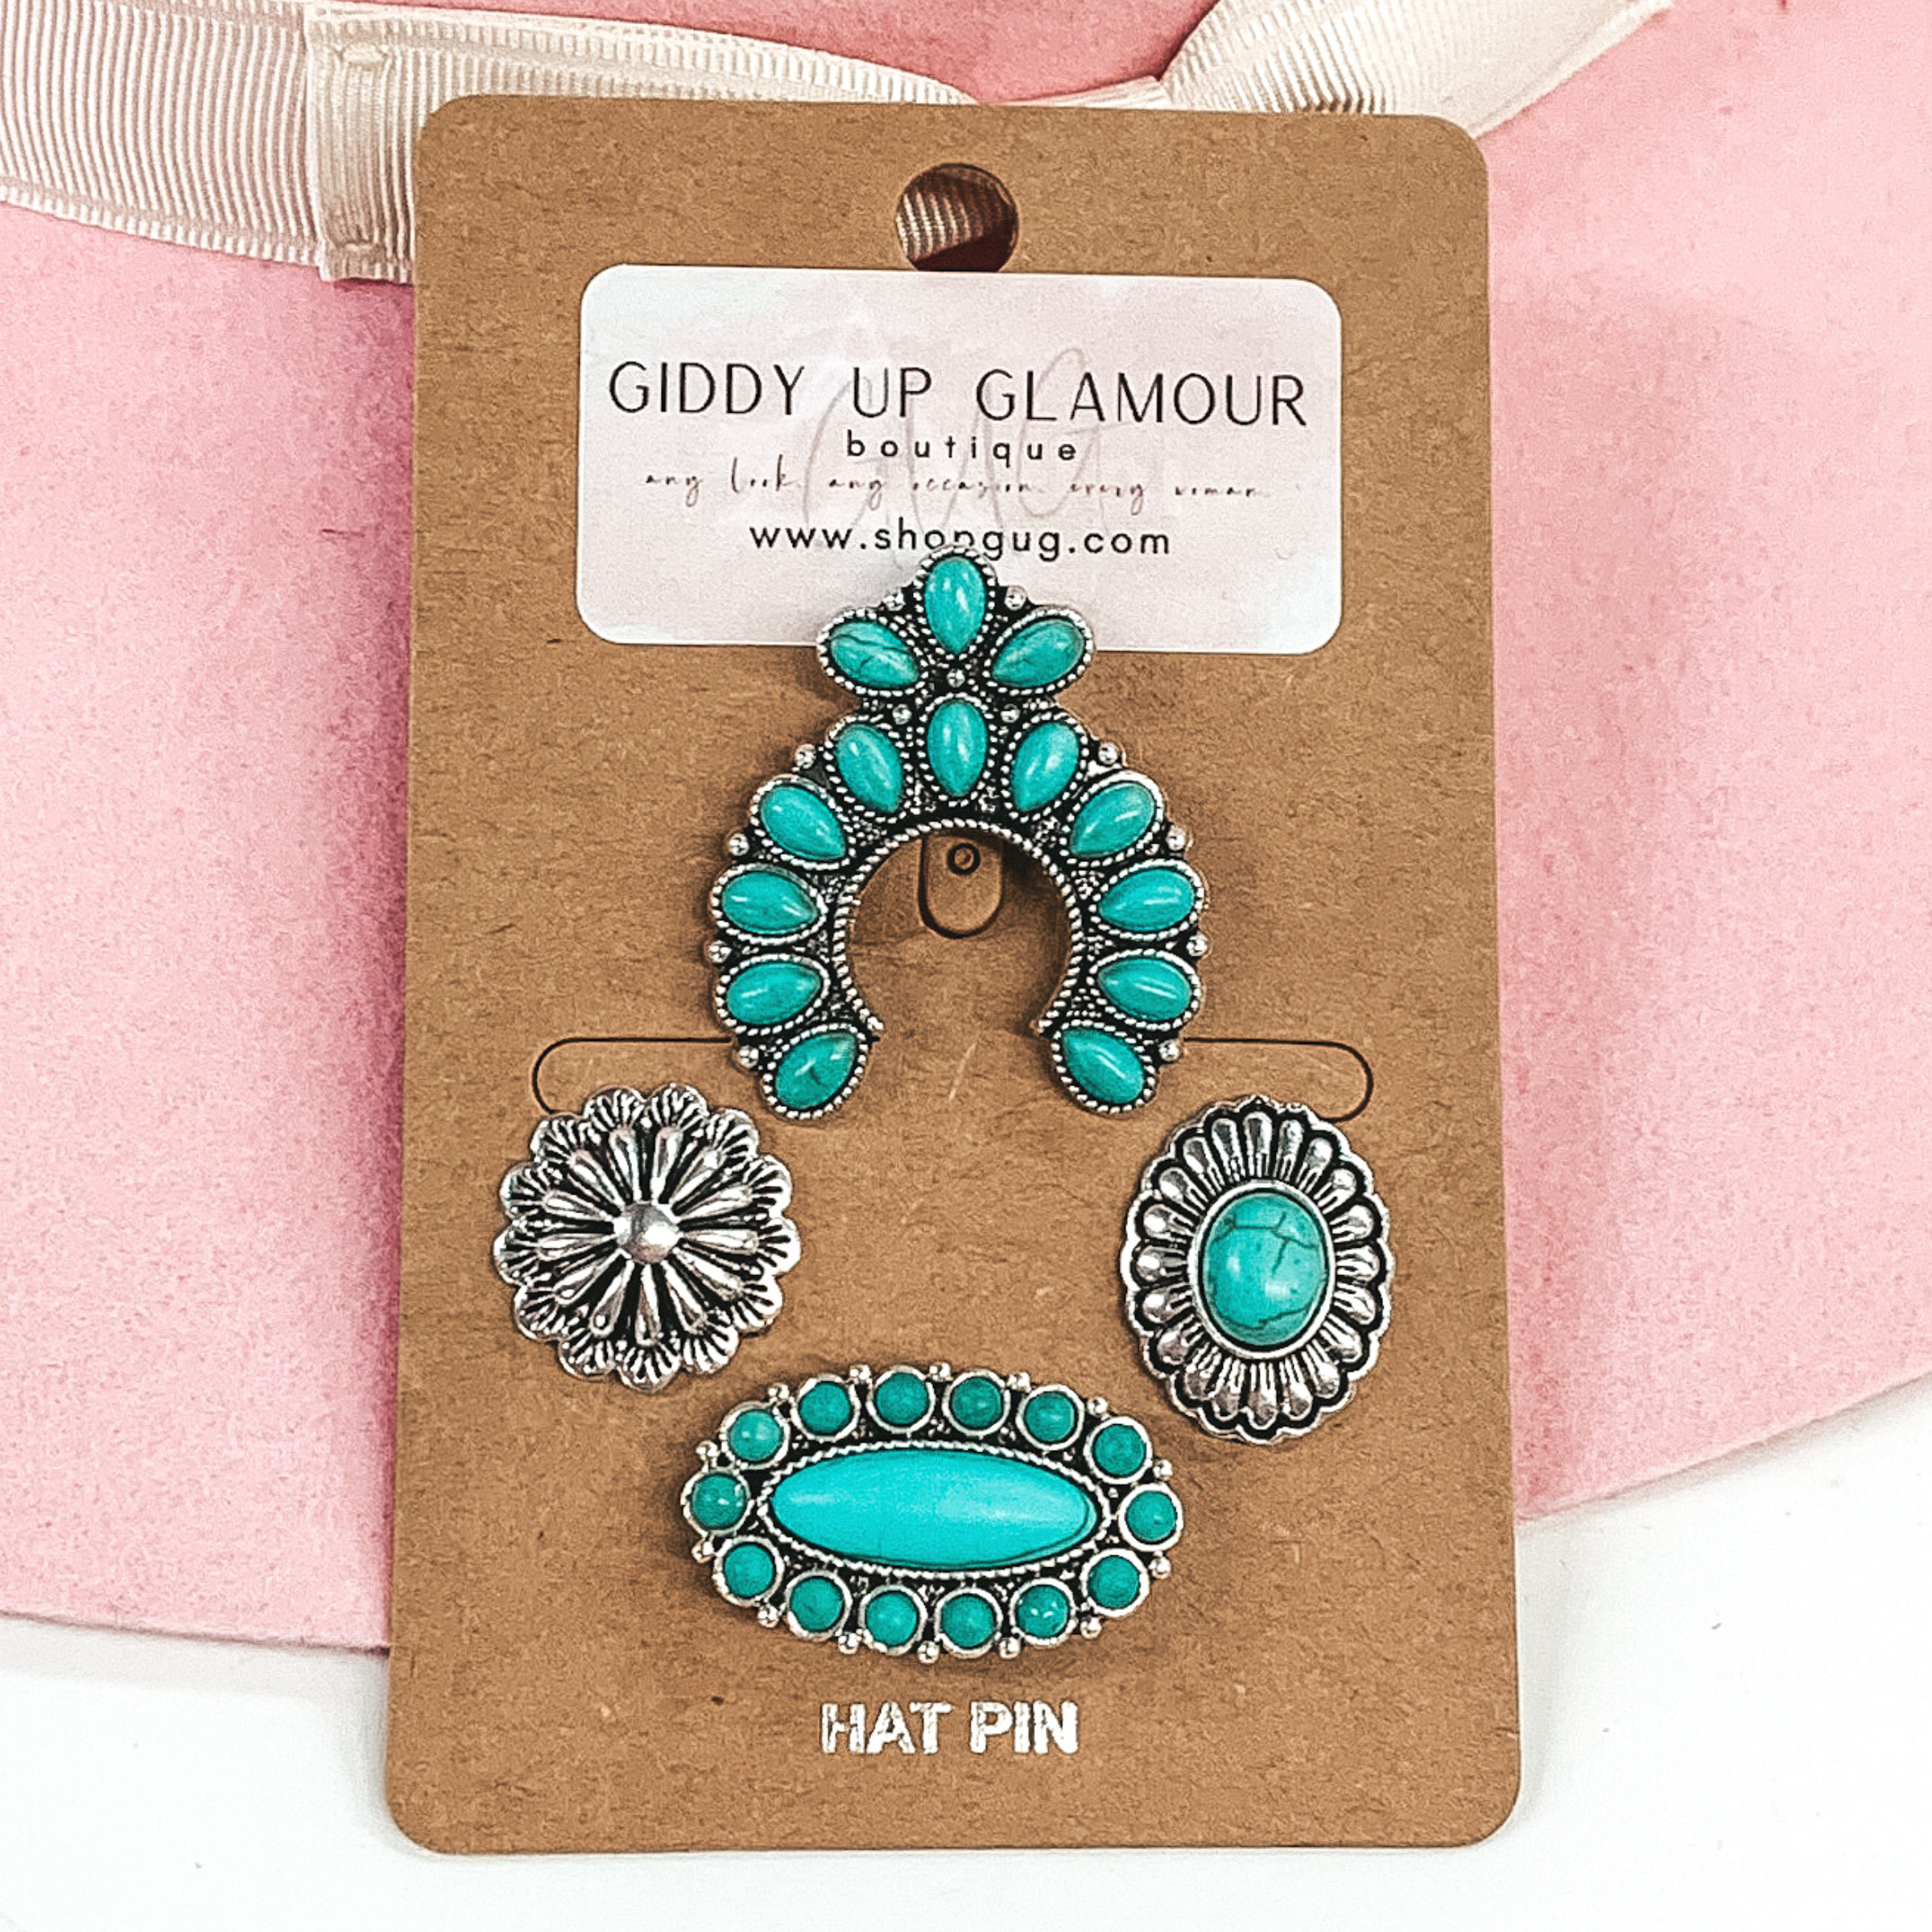 Squash Blossom Hat Pin Set in Silver/Turquoise - Giddy Up Glamour Boutique